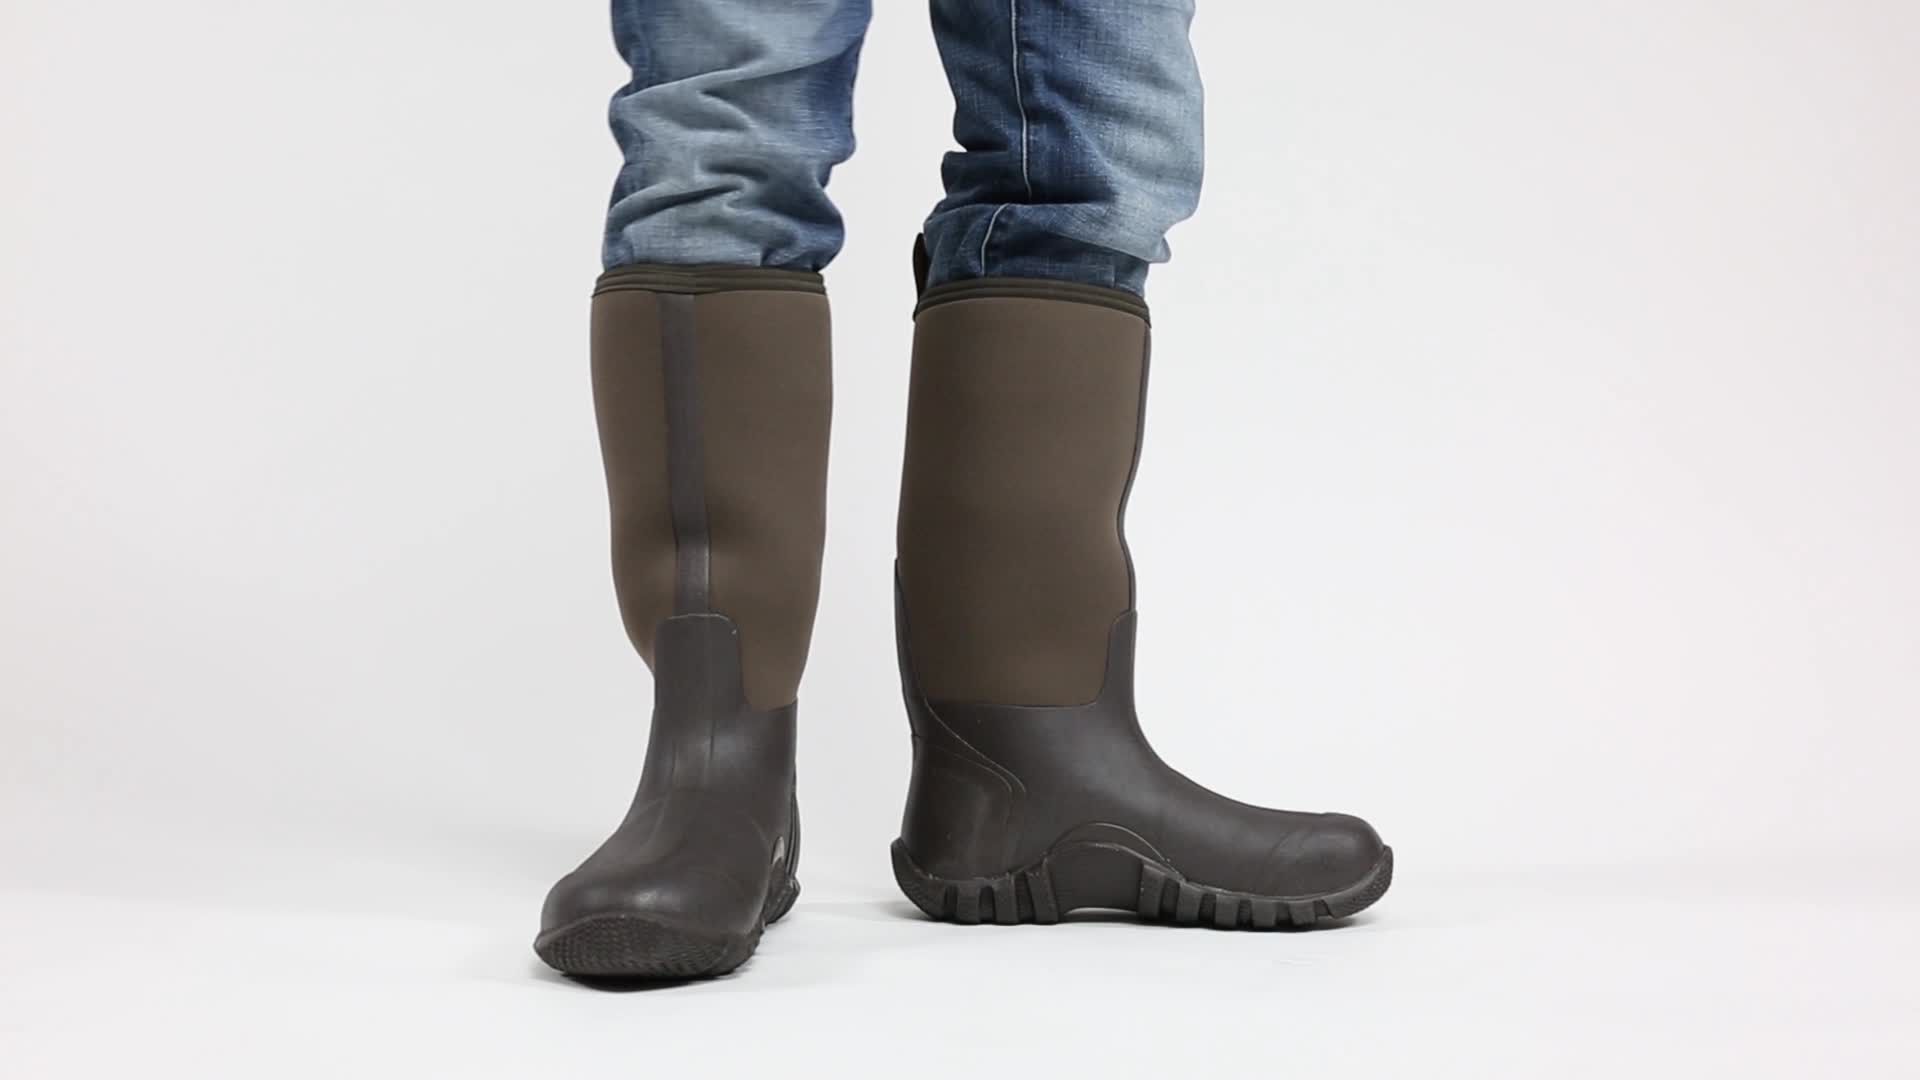 knee high rubber hunting boots